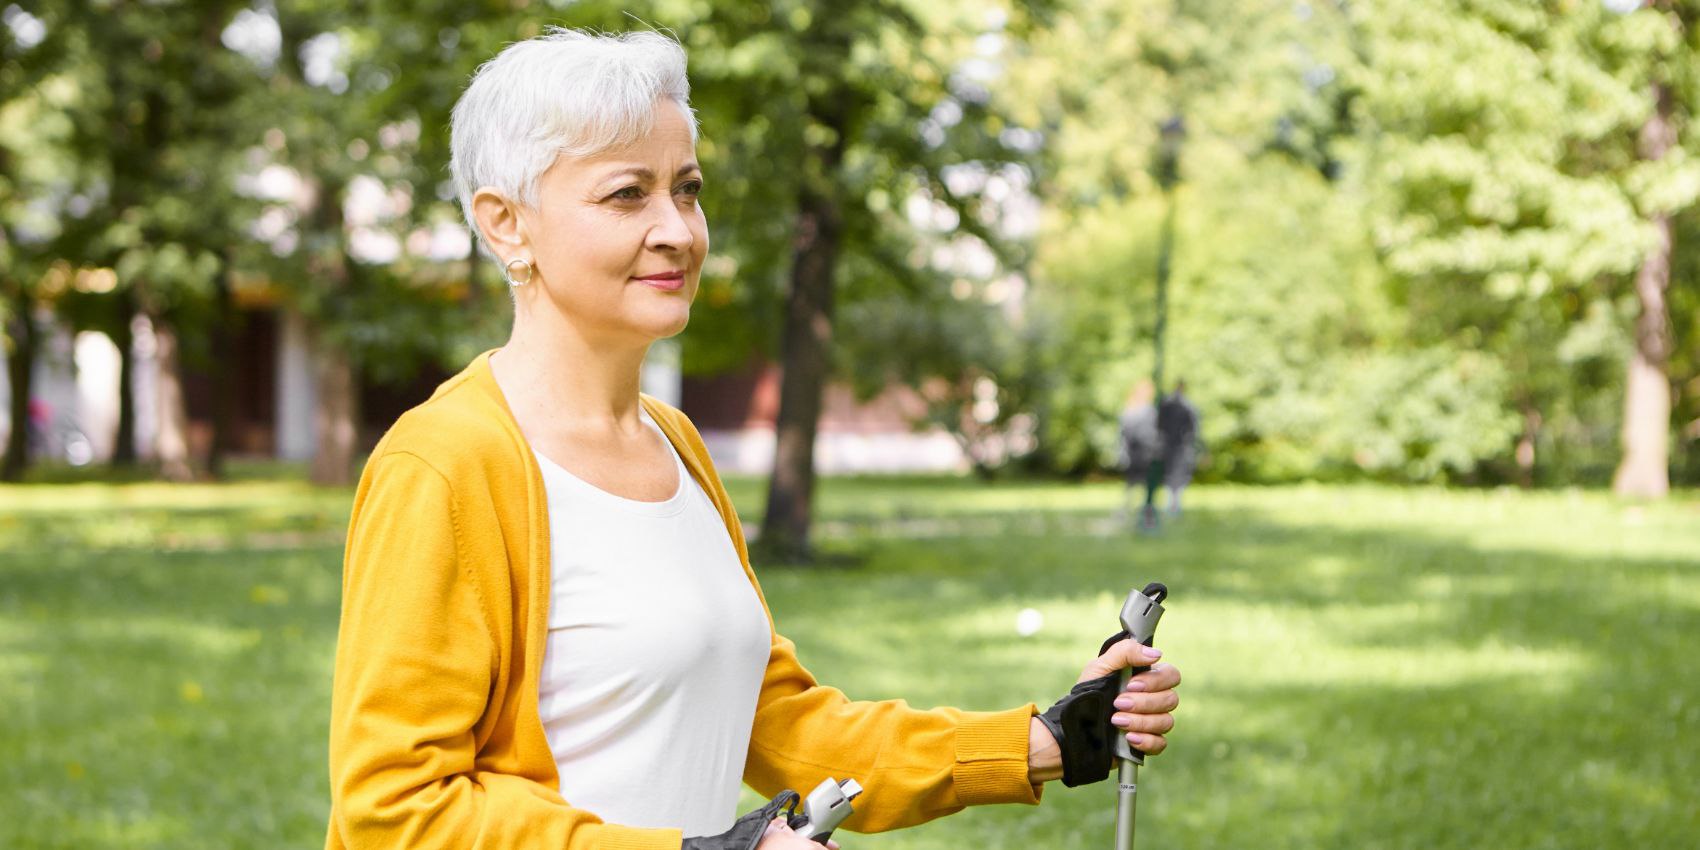 mature people aging sports well being concept beautiful stylish elderly woman choosing healthy active lifestyle retirement spending morning outdoors enjoying scandinavian walking 1